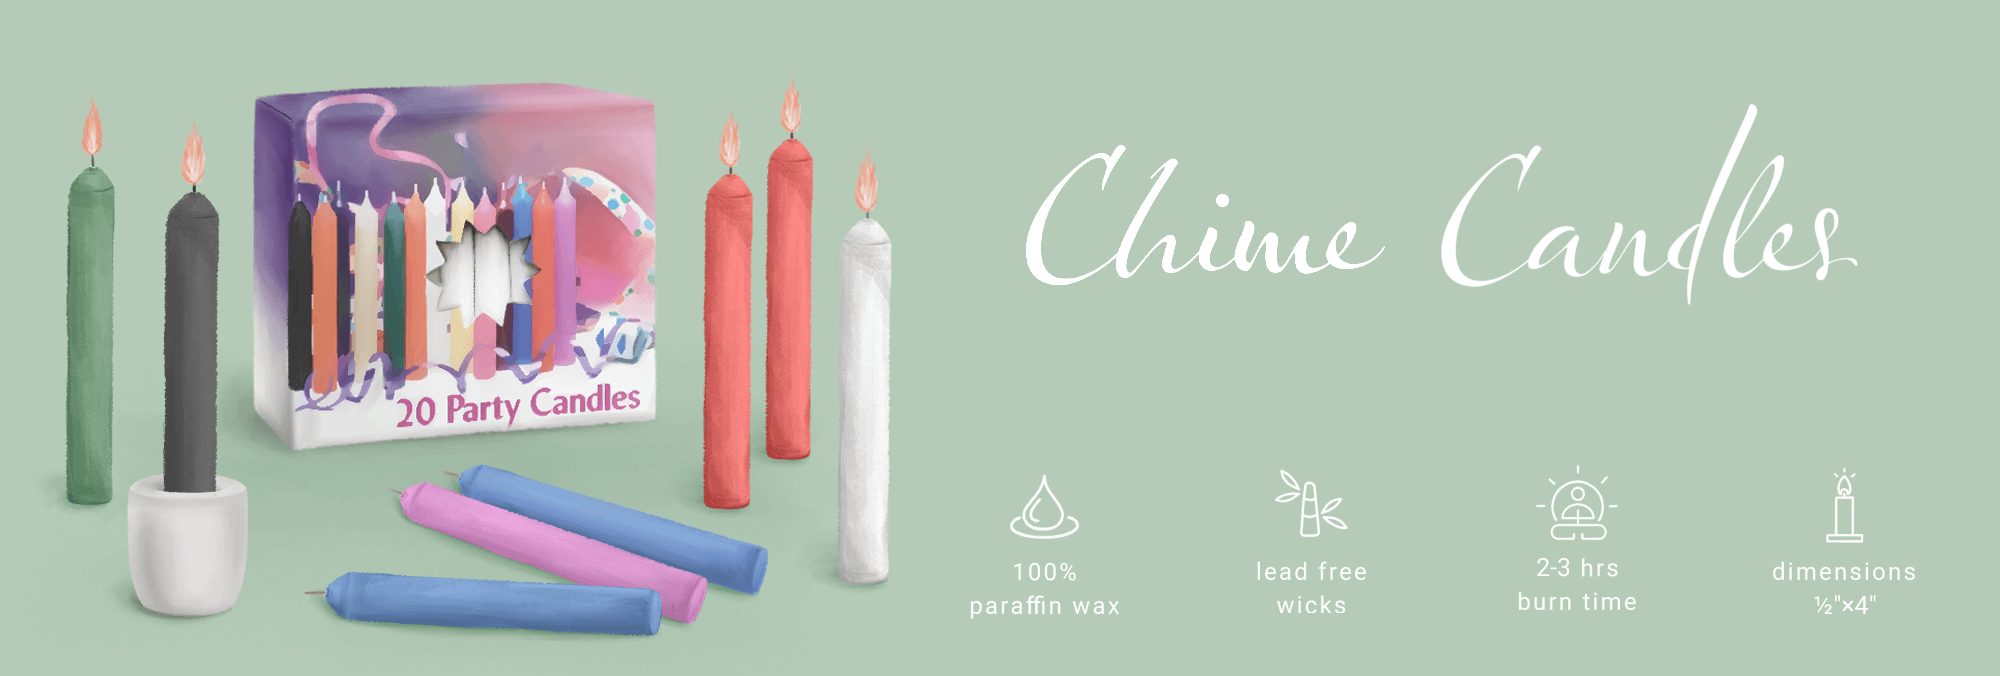 Chime Candles 4"